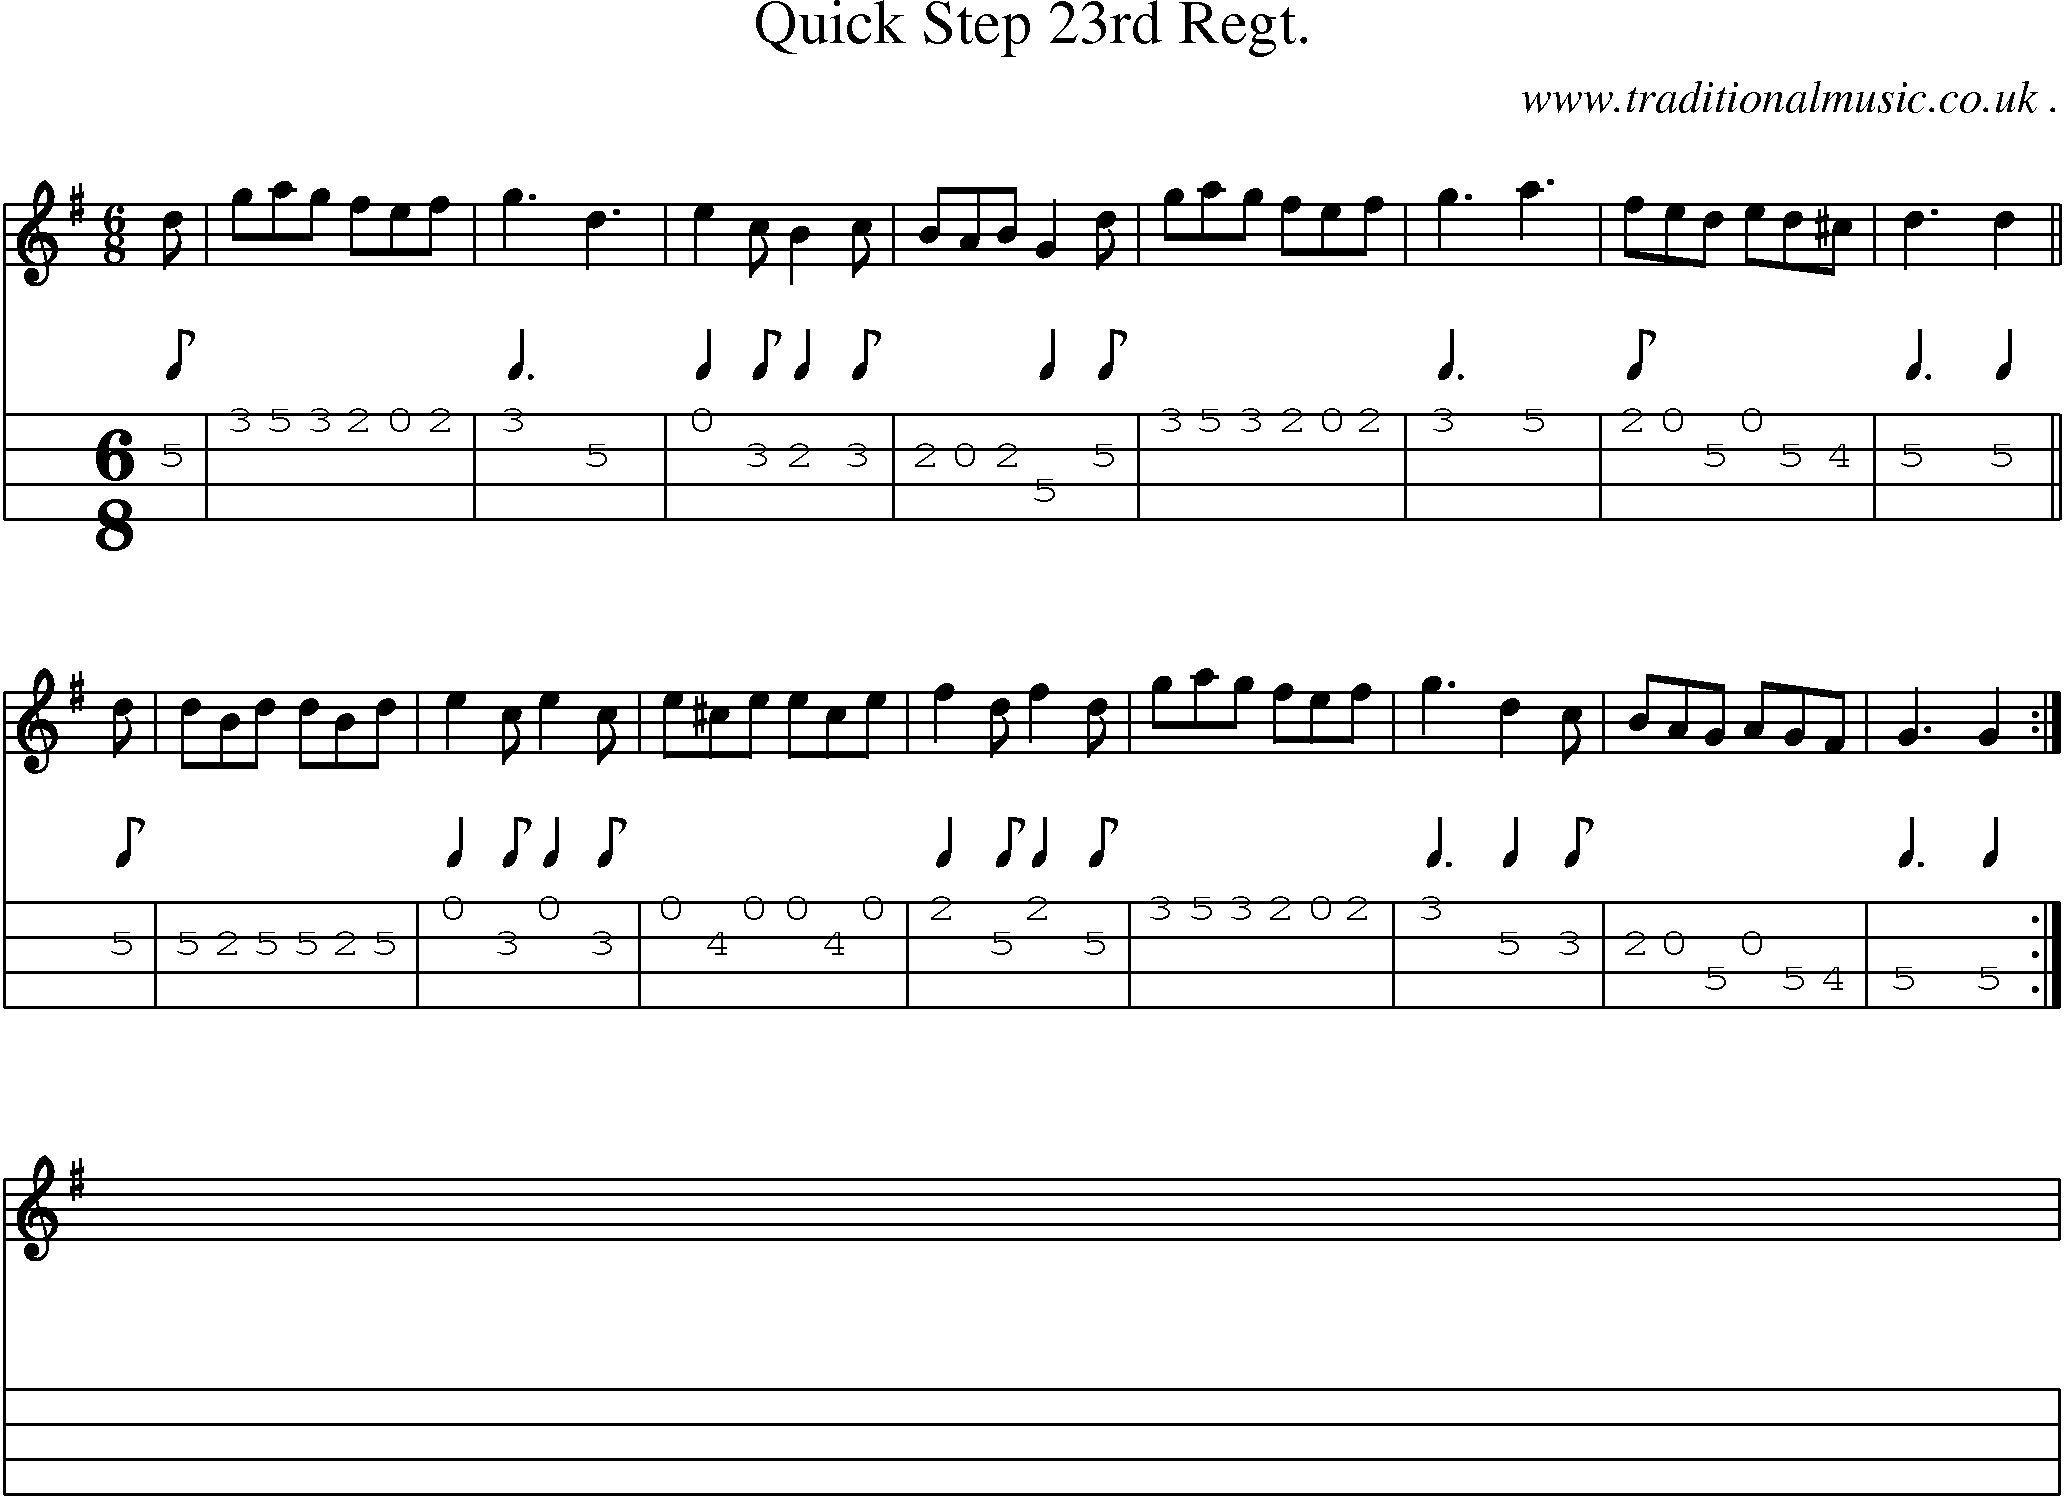 Sheet-music  score, Chords and Mandolin Tabs for Quick Step 23rd Regt